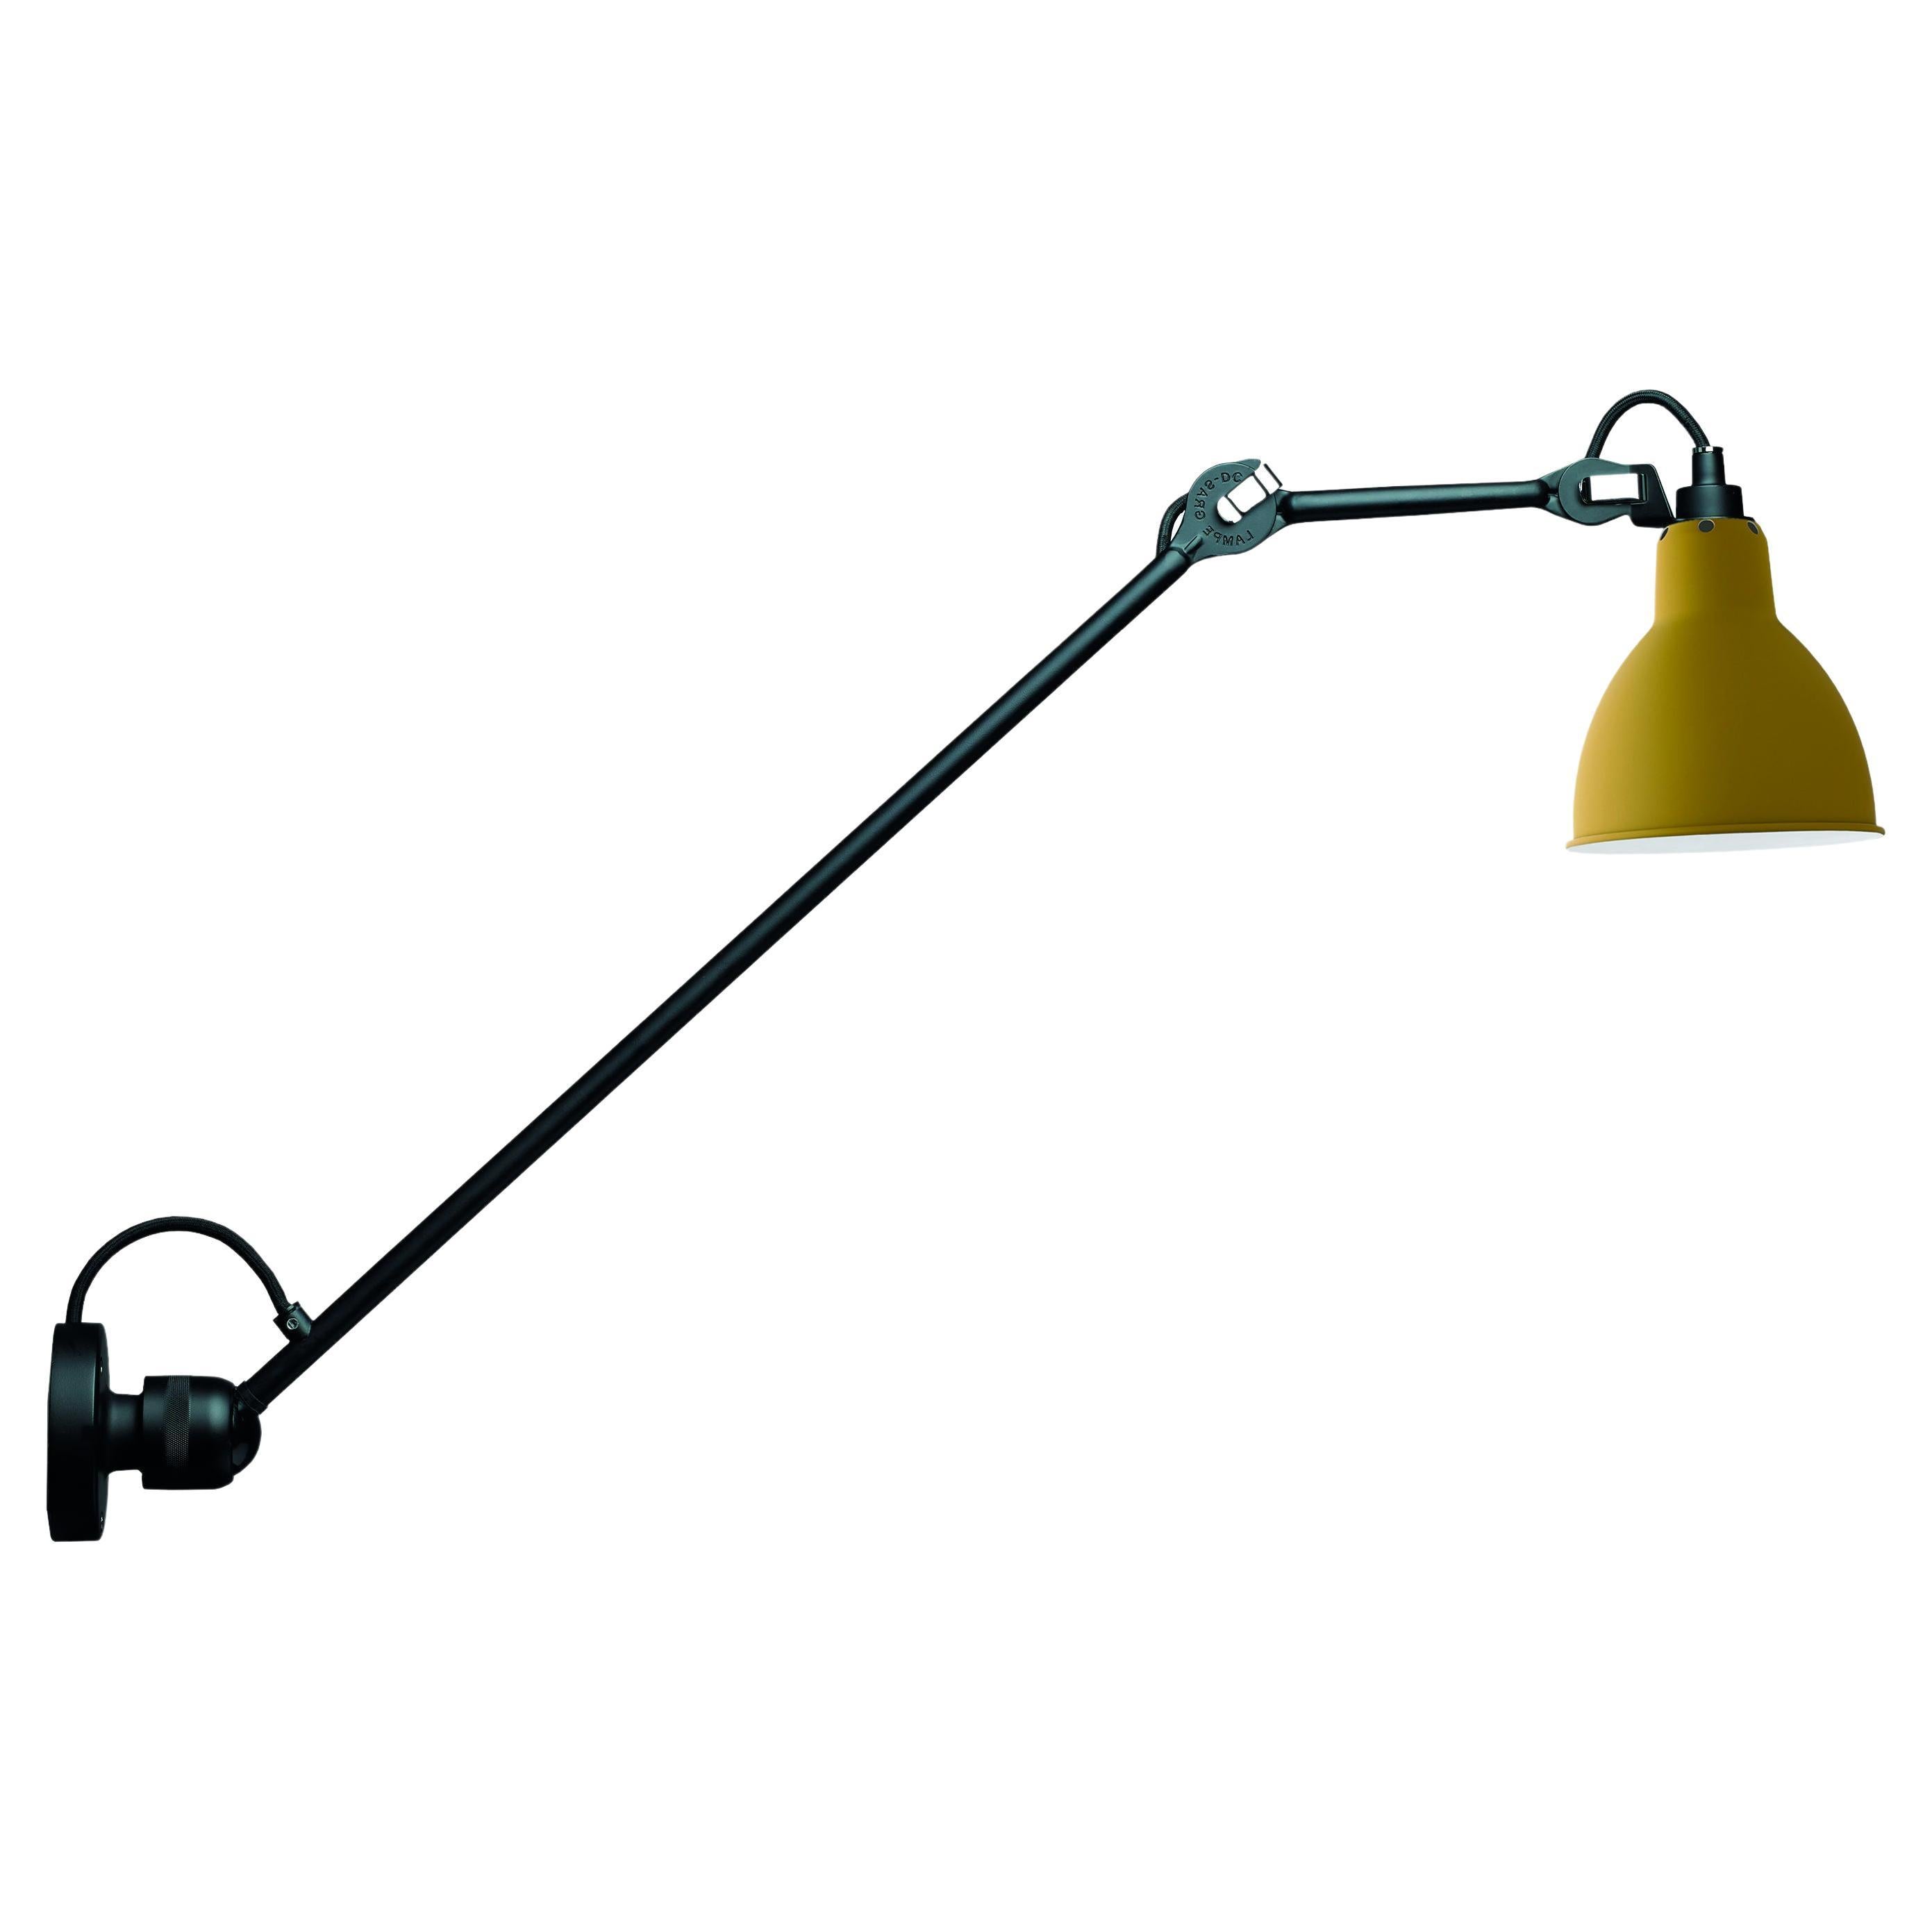 DCW Editions La Lampe Gras N°304 L60 Wall Lamp in Black Arm and Yellow Shade For Sale